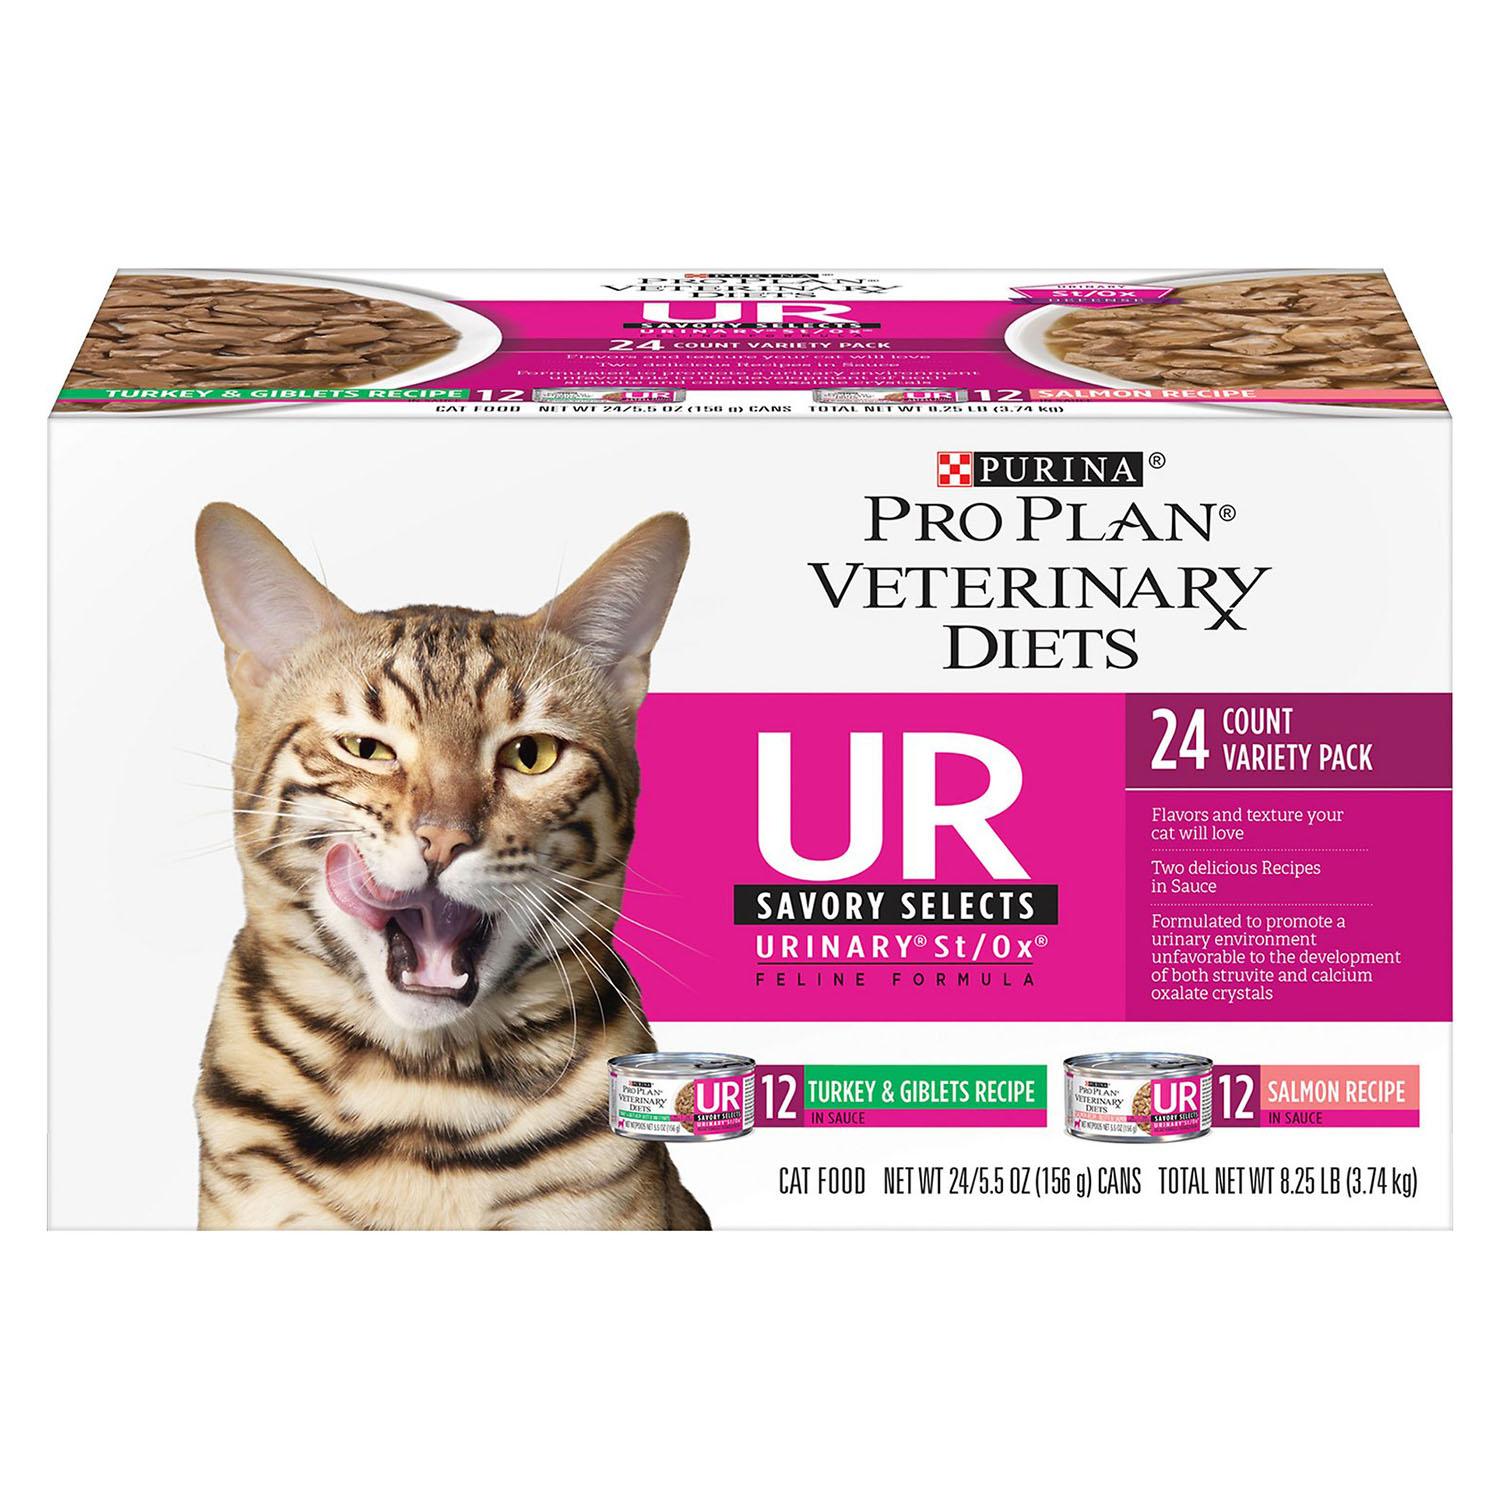 Purina Pro Plan Veterinary Diets UR Urinary St/Ox Cat Food 24 Pack - Canned